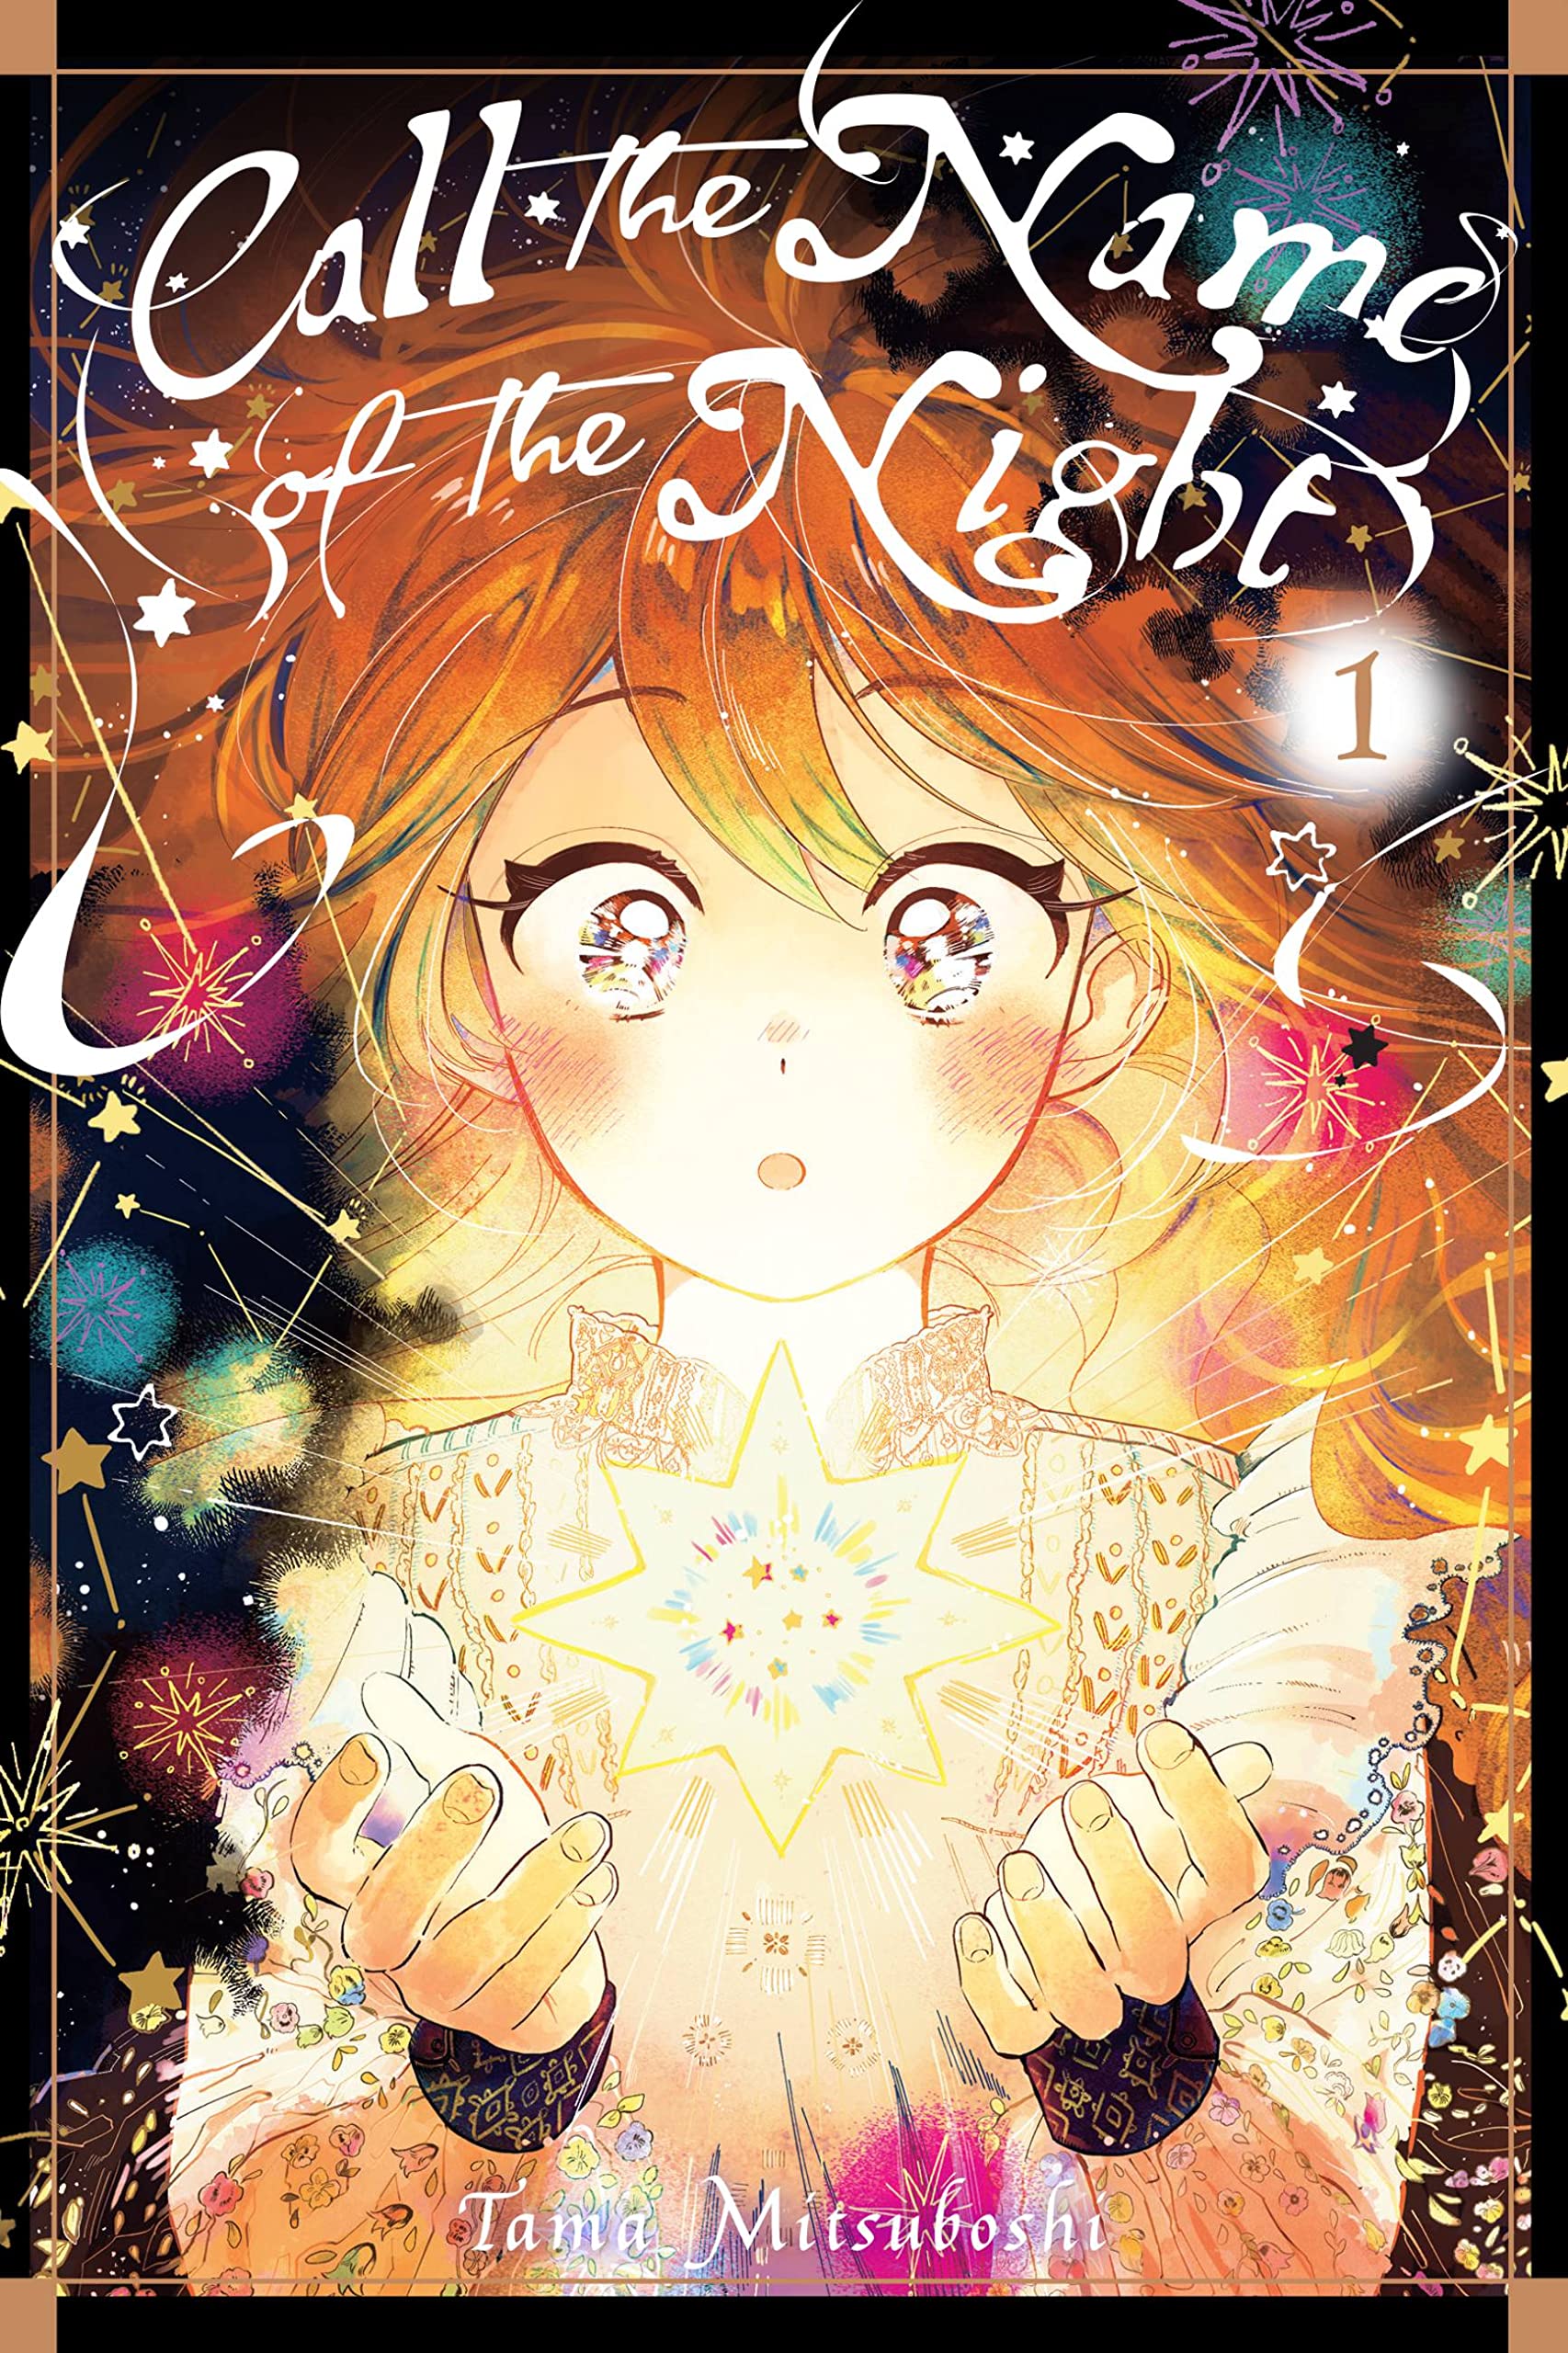 Call the Name of the Night Volume 1 Explores Love and Mystery - DarkSkyLady  Reviews